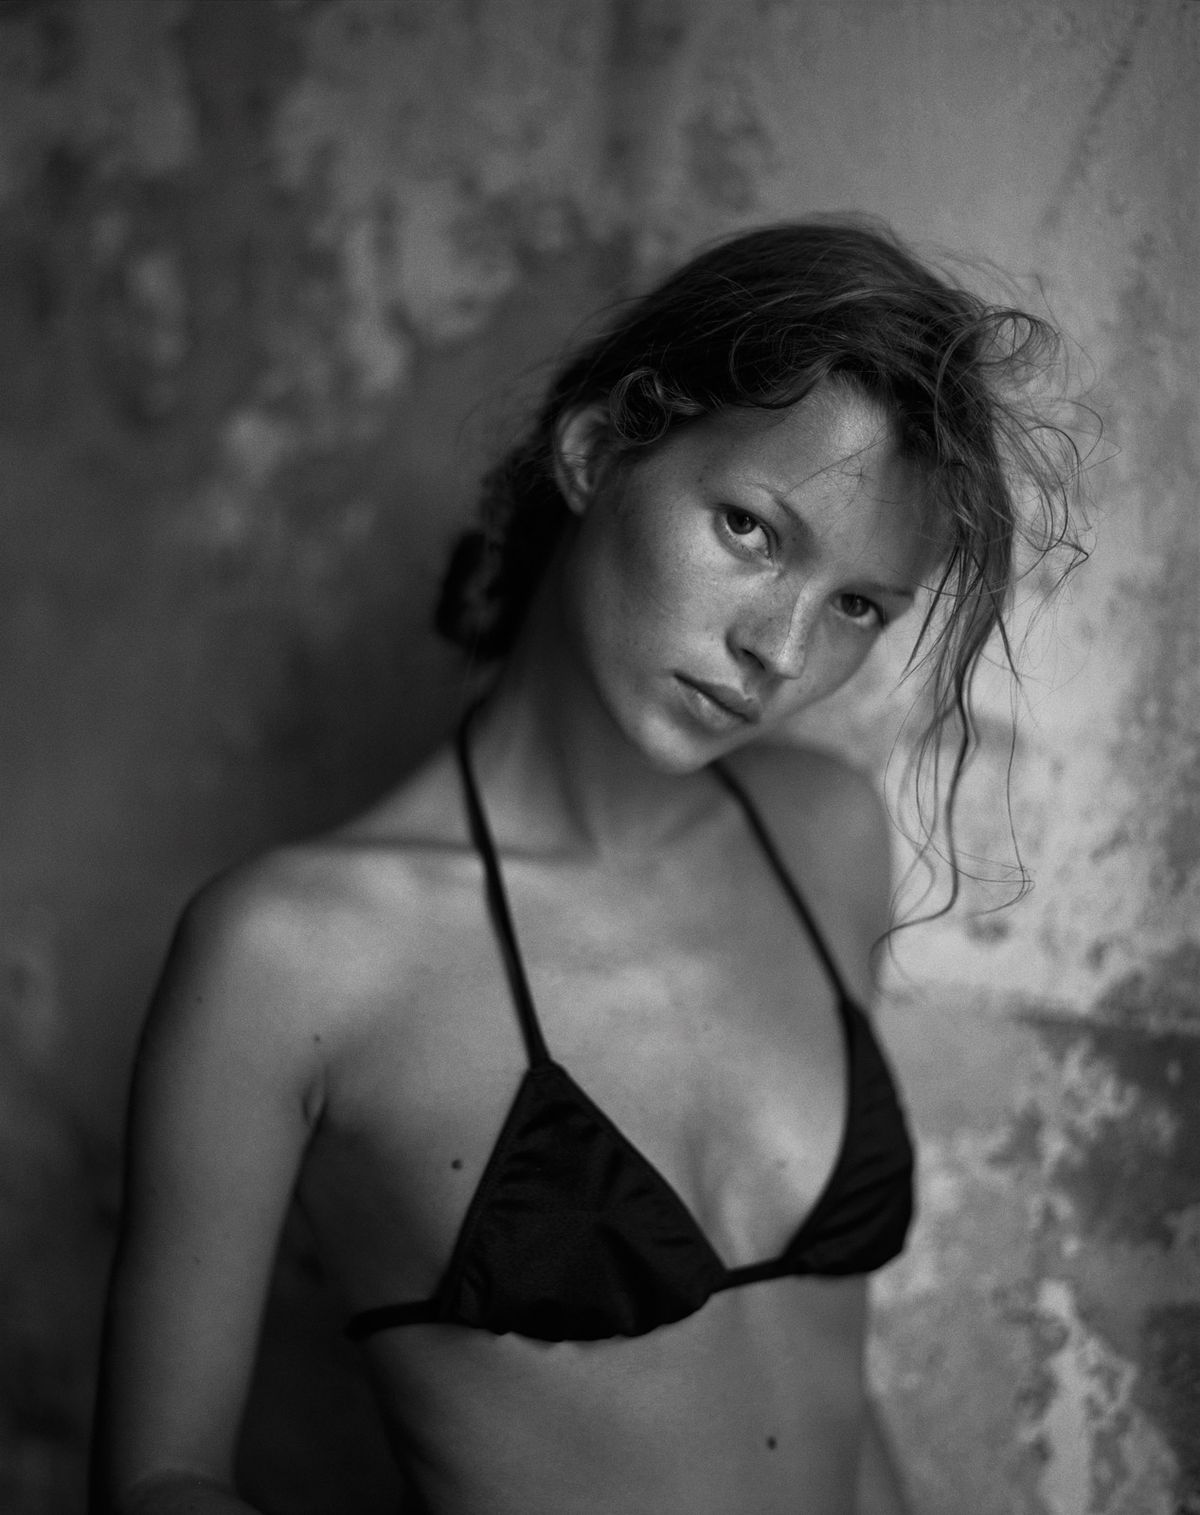 The portfolio includes never-before-published 1990s images of future supermodel Kate Moss Mario Sorrenti